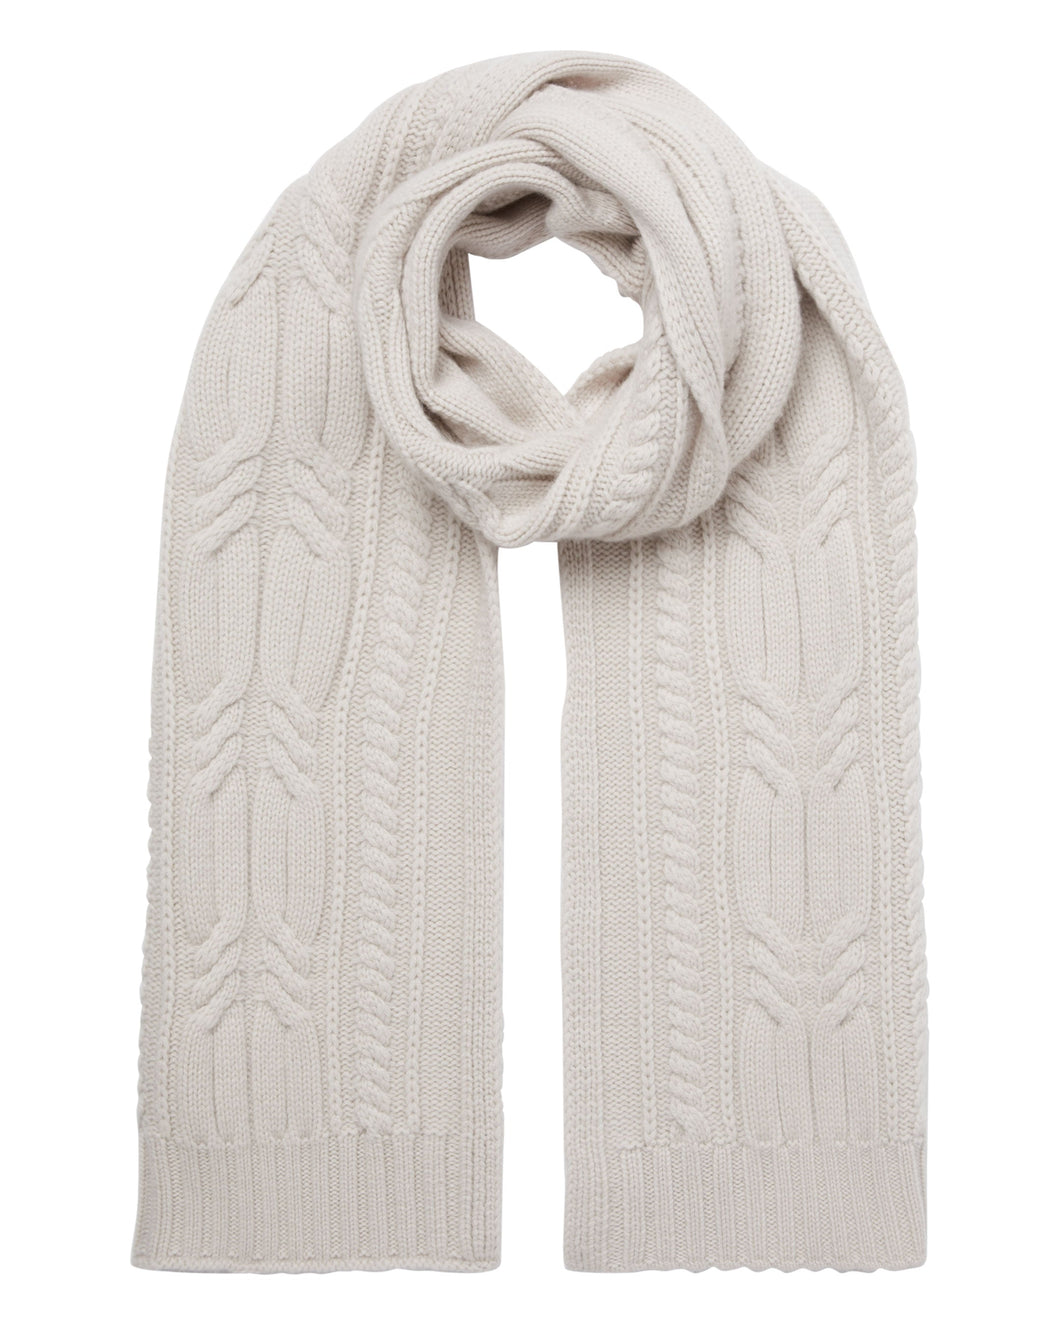 N.Peal Women's Twisted Cable Cashmere Scarf Snow Grey